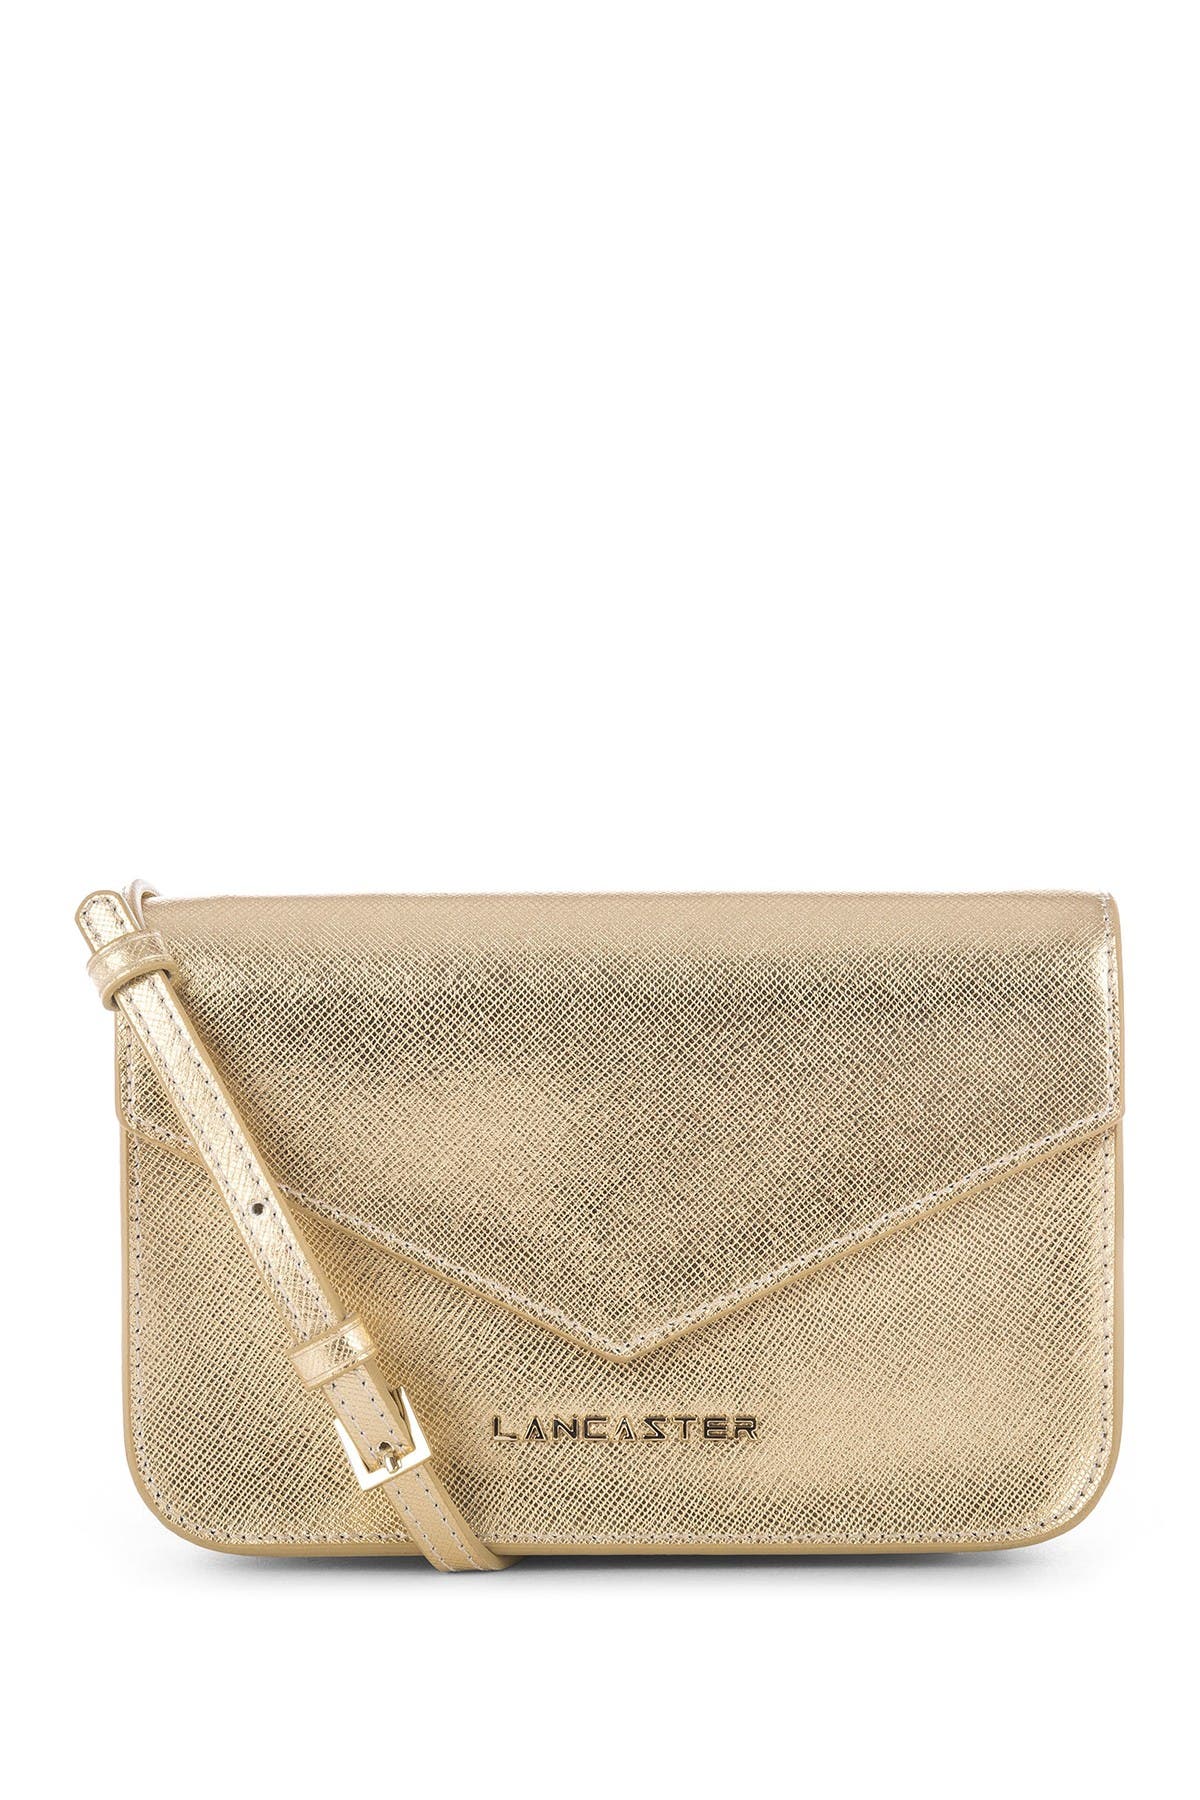 Lancaster Adeline Leather Crossbody Clutch In Gold2